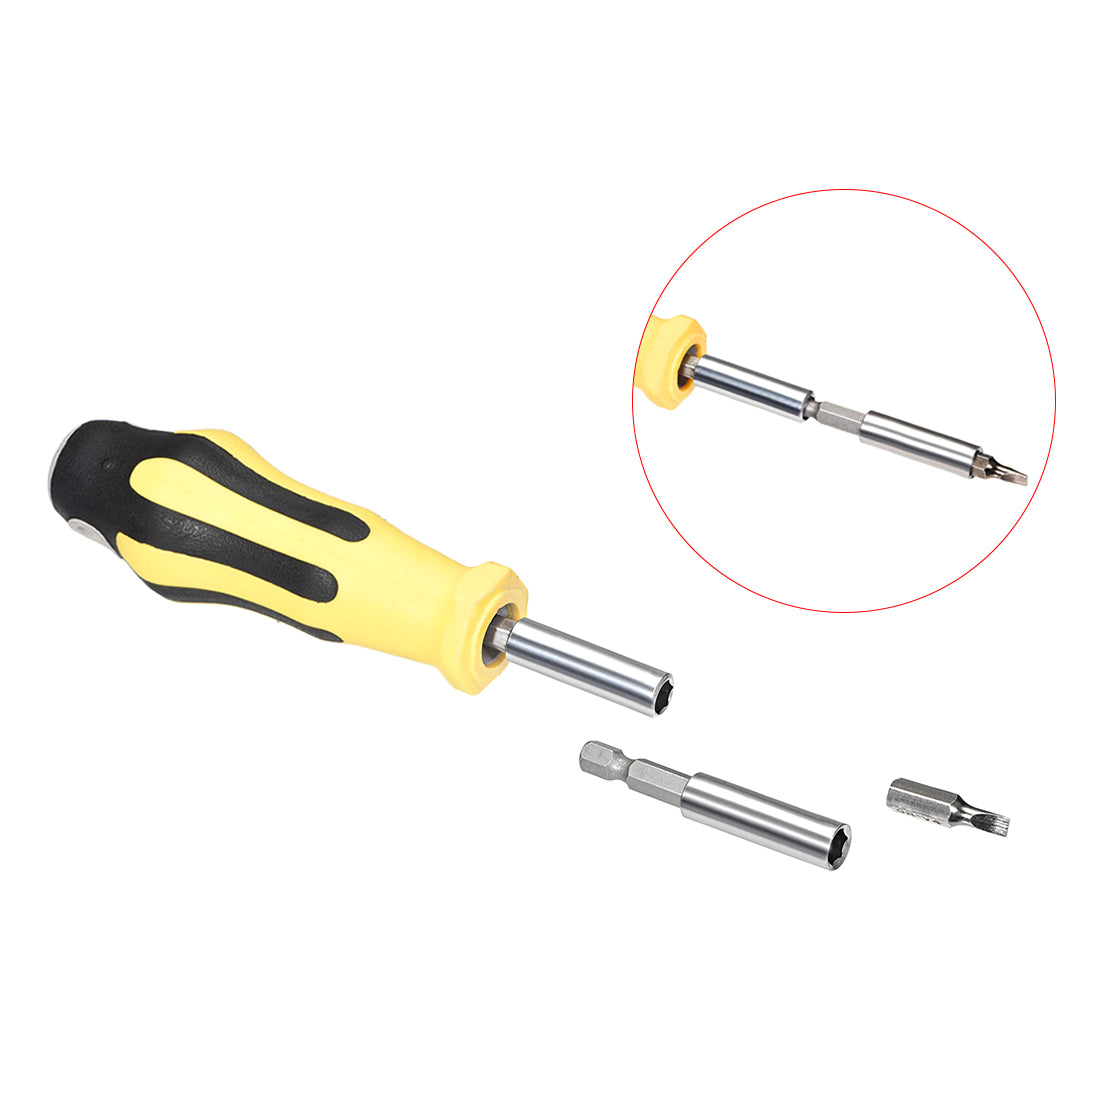 uxcell Uxcell Extension Extend Socket Drill Bit Holder Magnetic Hex Screwdriver Power Tools ,2.4-inch Length,1/4''-Hexagon Drill